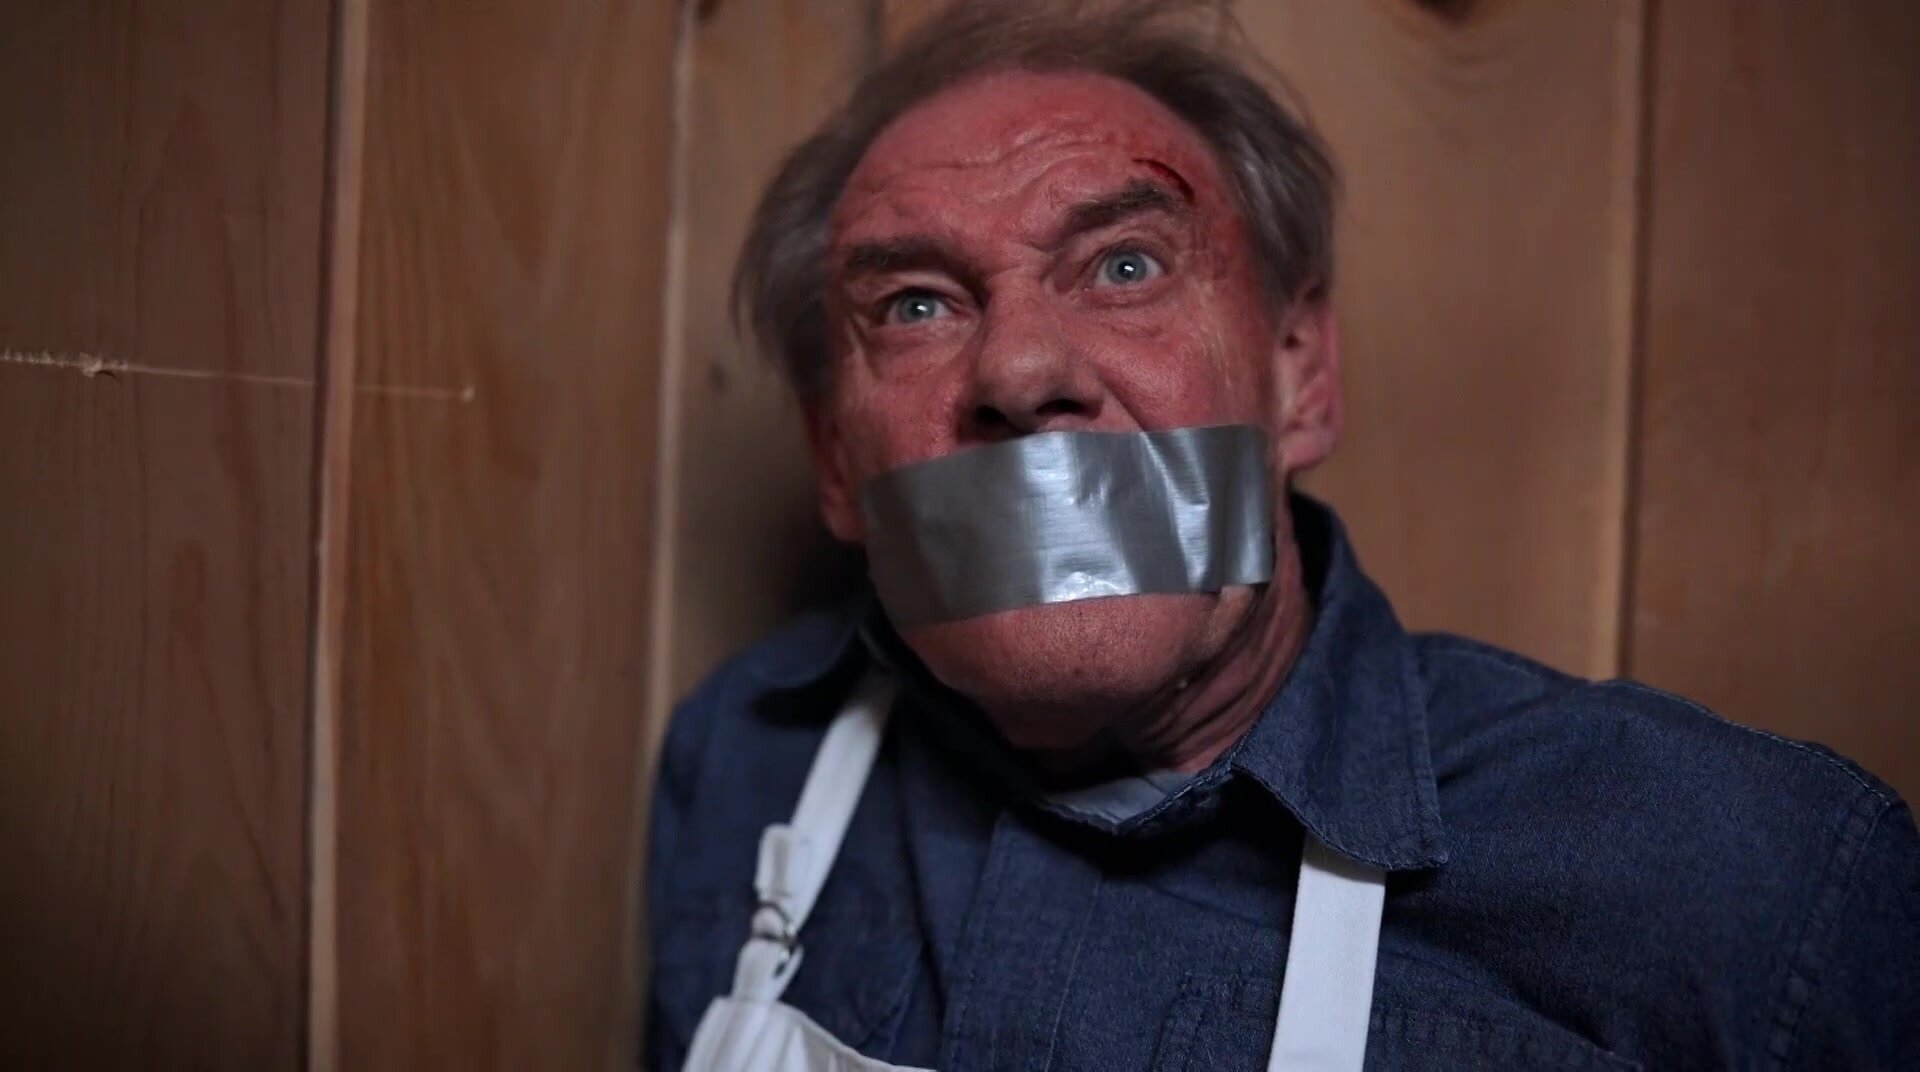 Daddy duct tape gagged and squirming